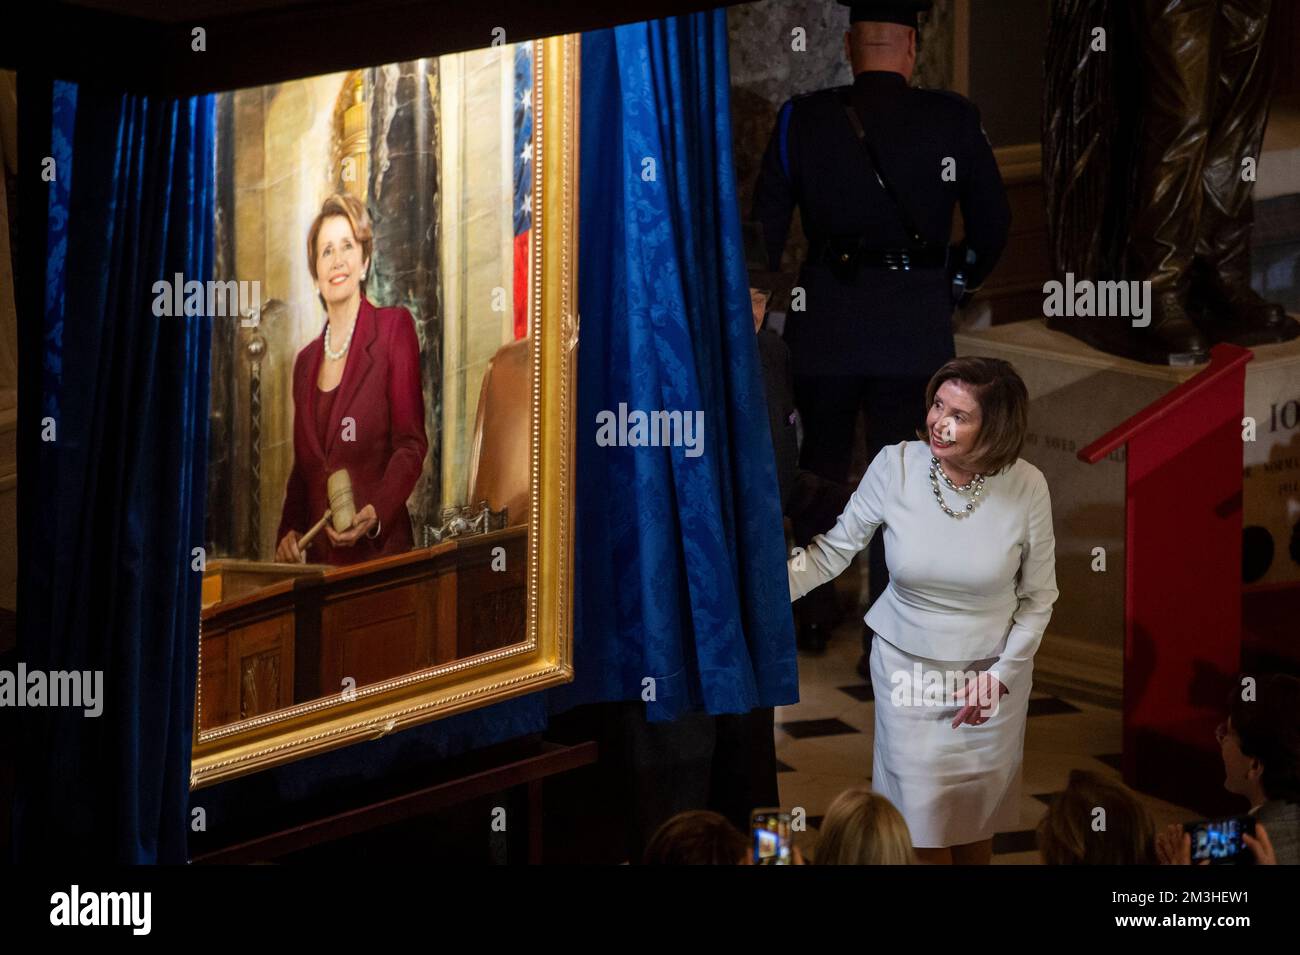 Washington, United States Of America. 14th Dec, 2022. Speaker of the United States House of Representatives Nancy Pelosi (Democrat of California) is joined by her husband Paul Pelosi as she draws back the curtain to unveil her official portrait in Statuary Hall at the US Capitol in Washington, DC, Wednesday, December 14, 2022. Credit: Rod Lamkey/CNP/Sipa USA Credit: Sipa USA/Alamy Live News Stock Photo